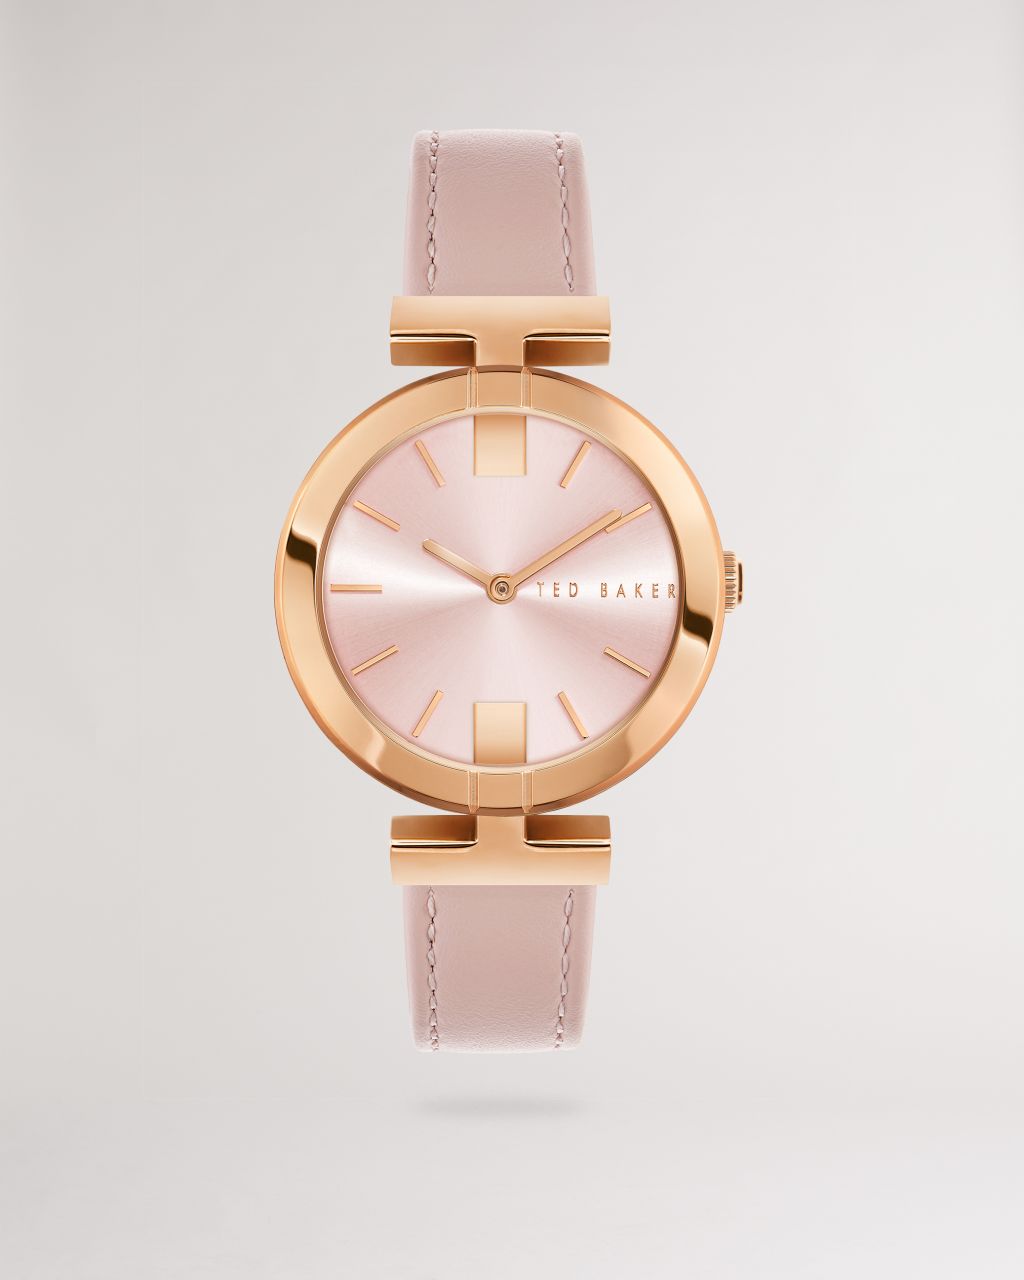 Ted Baker Women's T Frame Leather Strap Watch in Pink, Darbyy